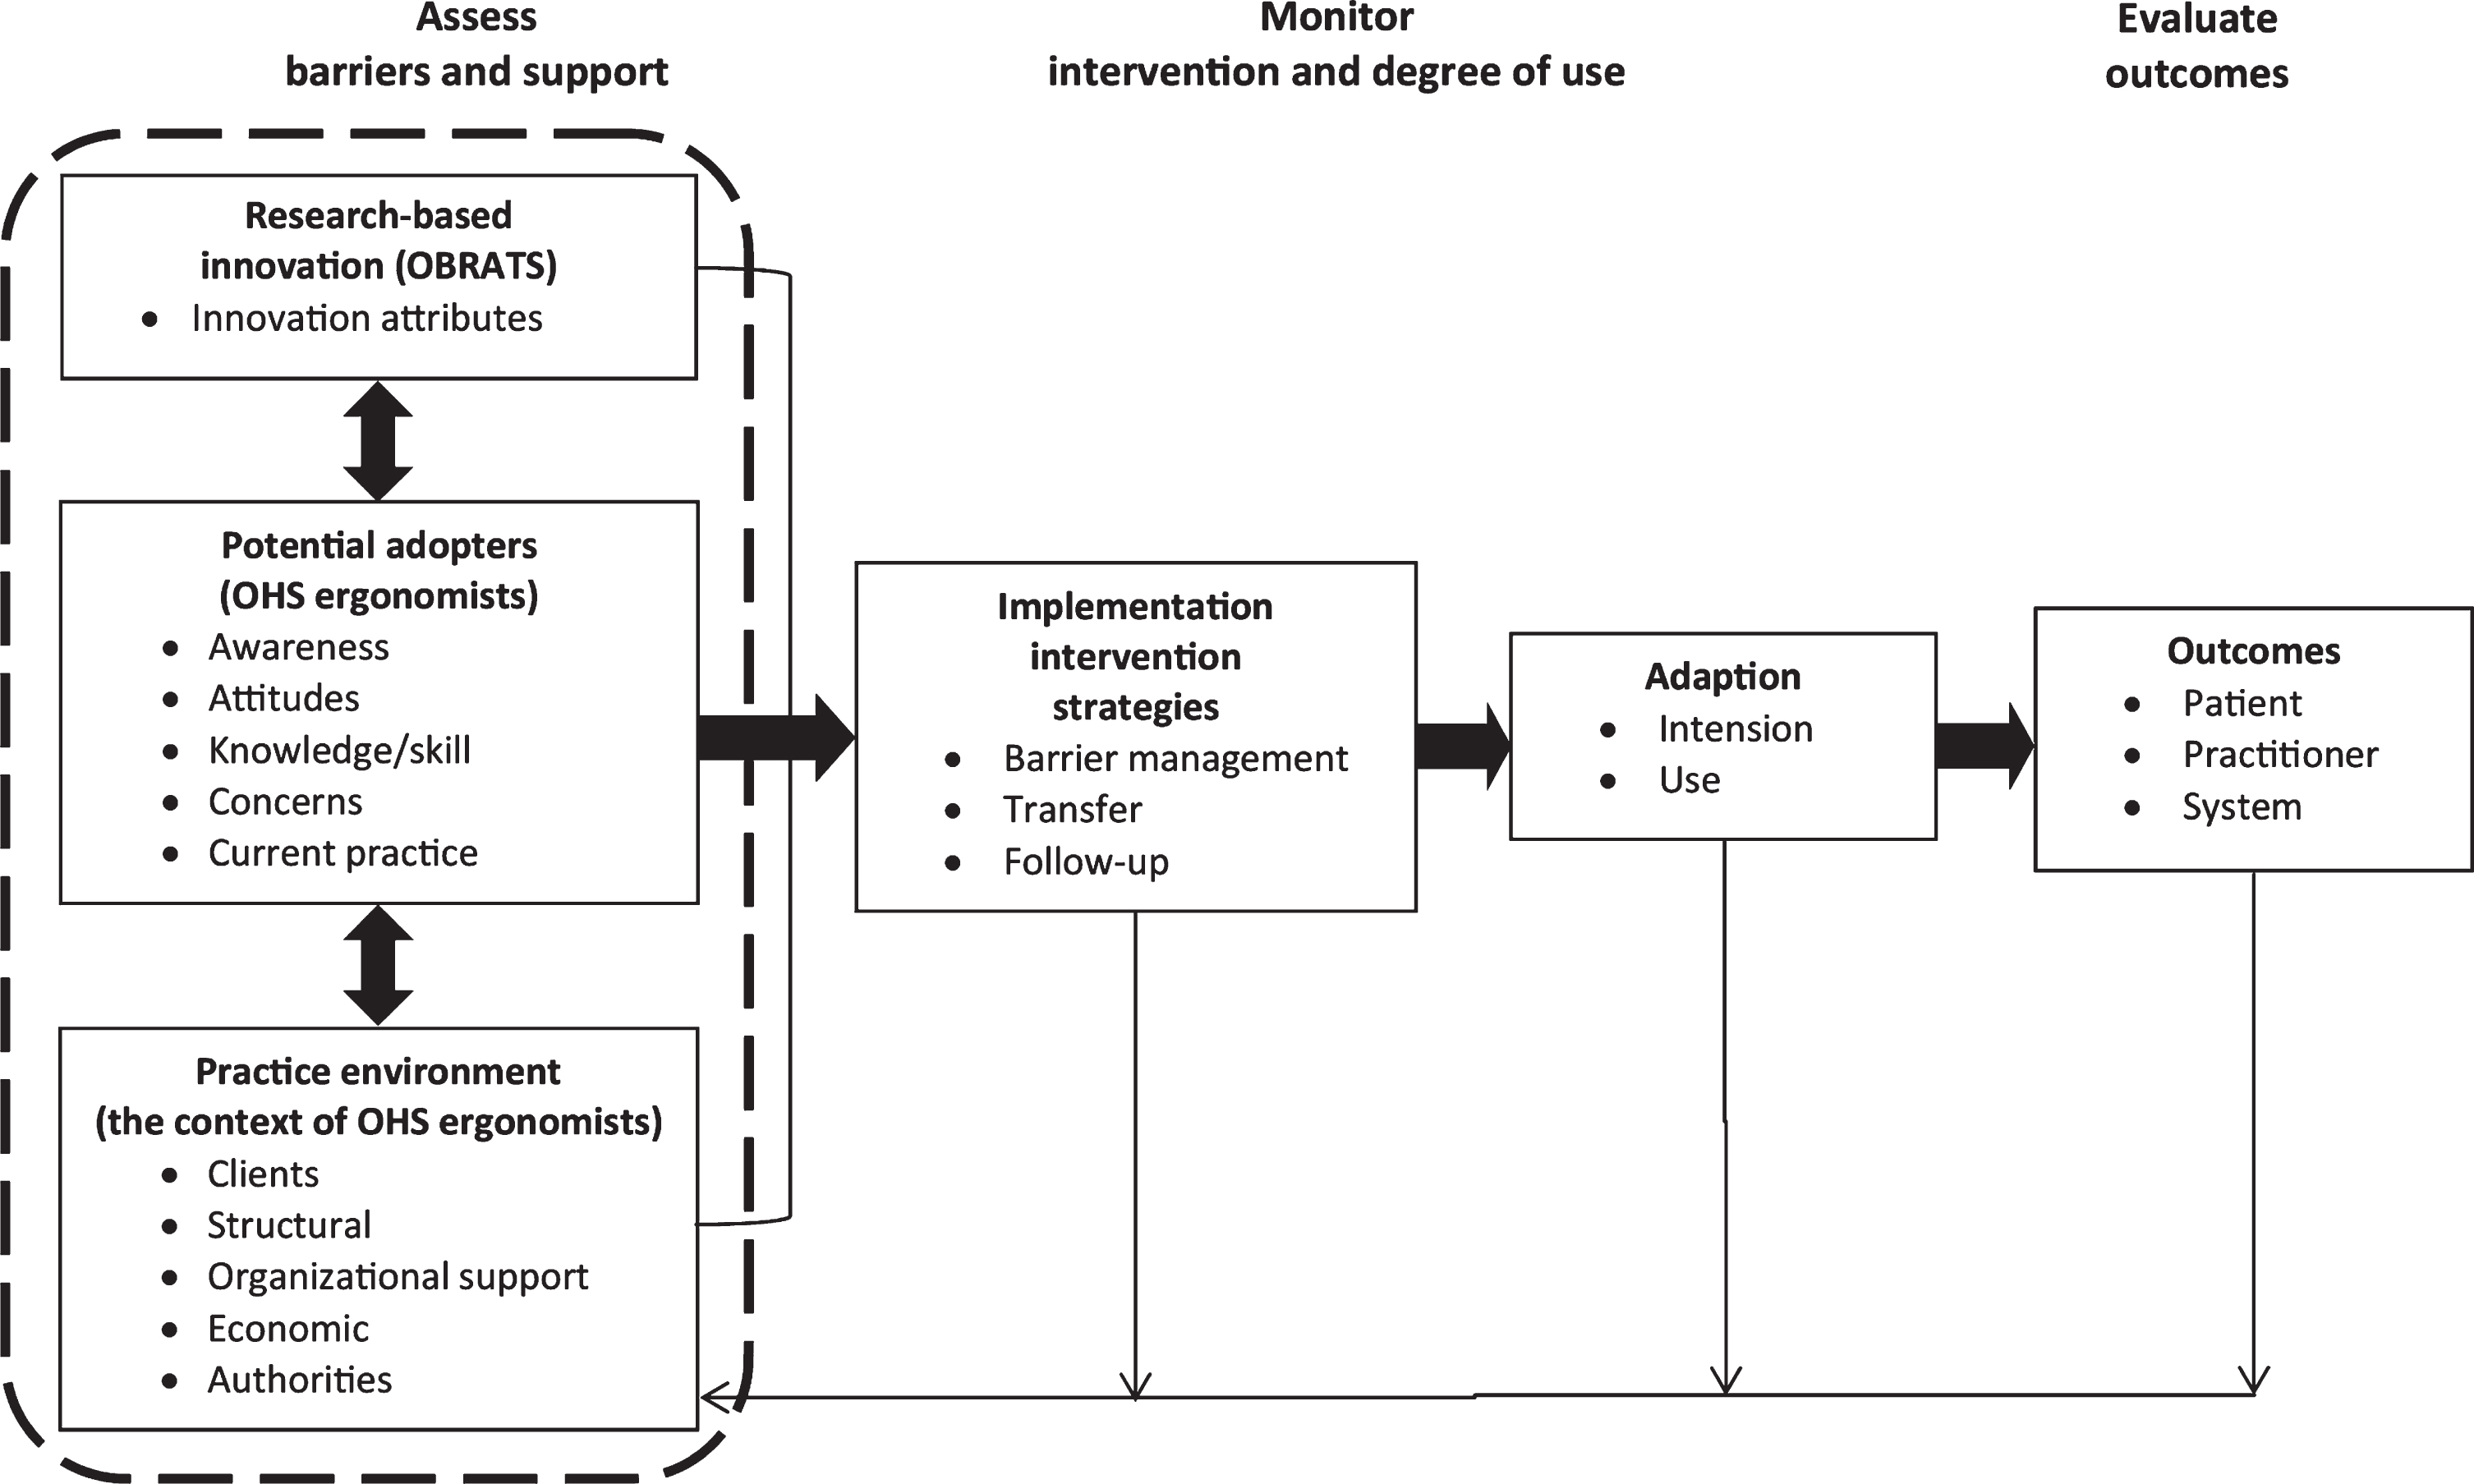 An adapted version of “The Ottawa Model of Research Use” (OMRU). The figure shows the results in the present study fitted into the three fundamental elements (dashed frame); the innovation (OBRATs), potential adopters (OHS ergonomists) and practice environment (context of OHS ergonomists).